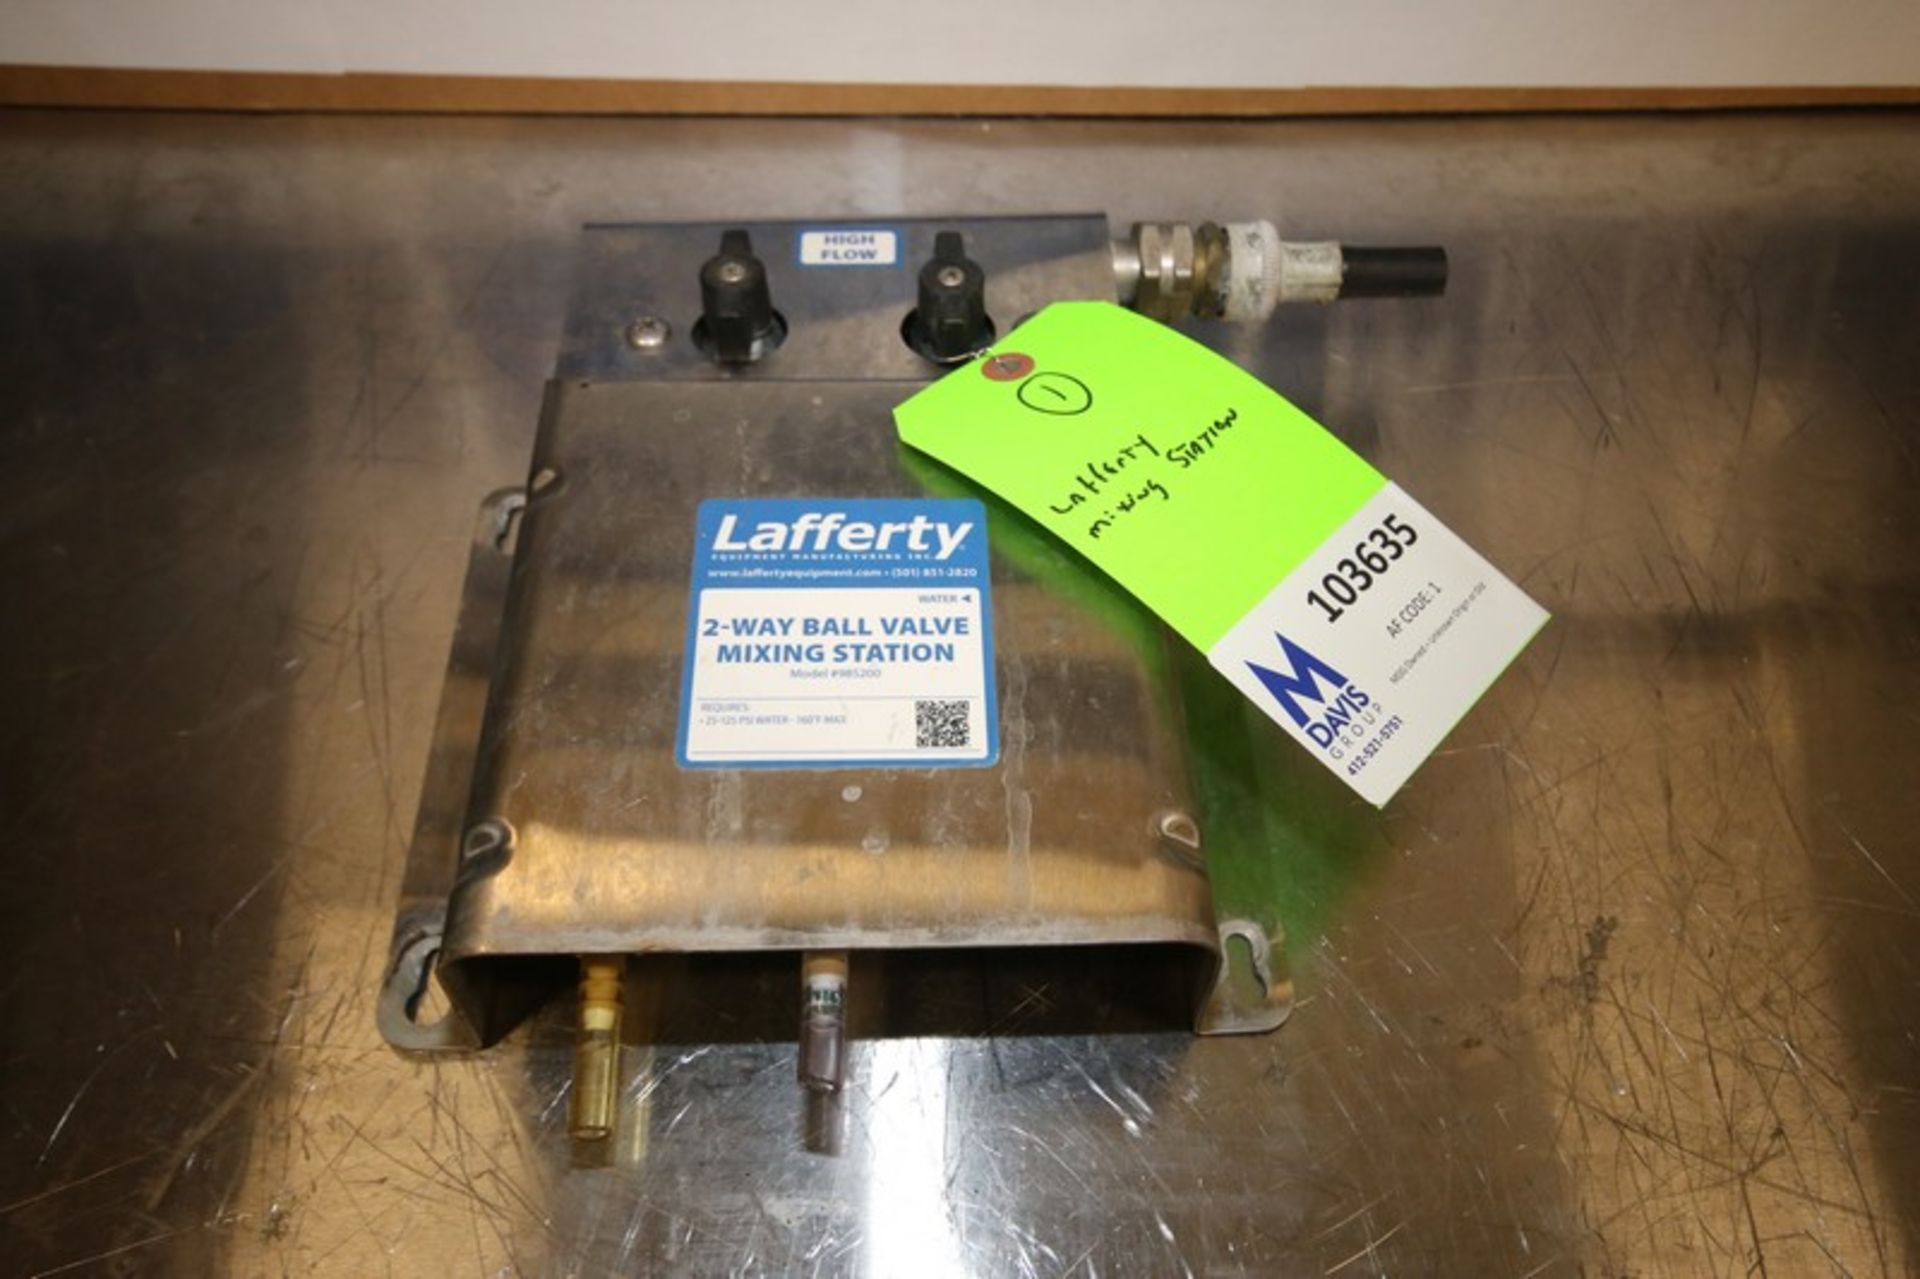 Lafferty 2-Way Ball Valve Mixing Station, Wall Mounted, Model 985200 (INV#103635) (Located at the